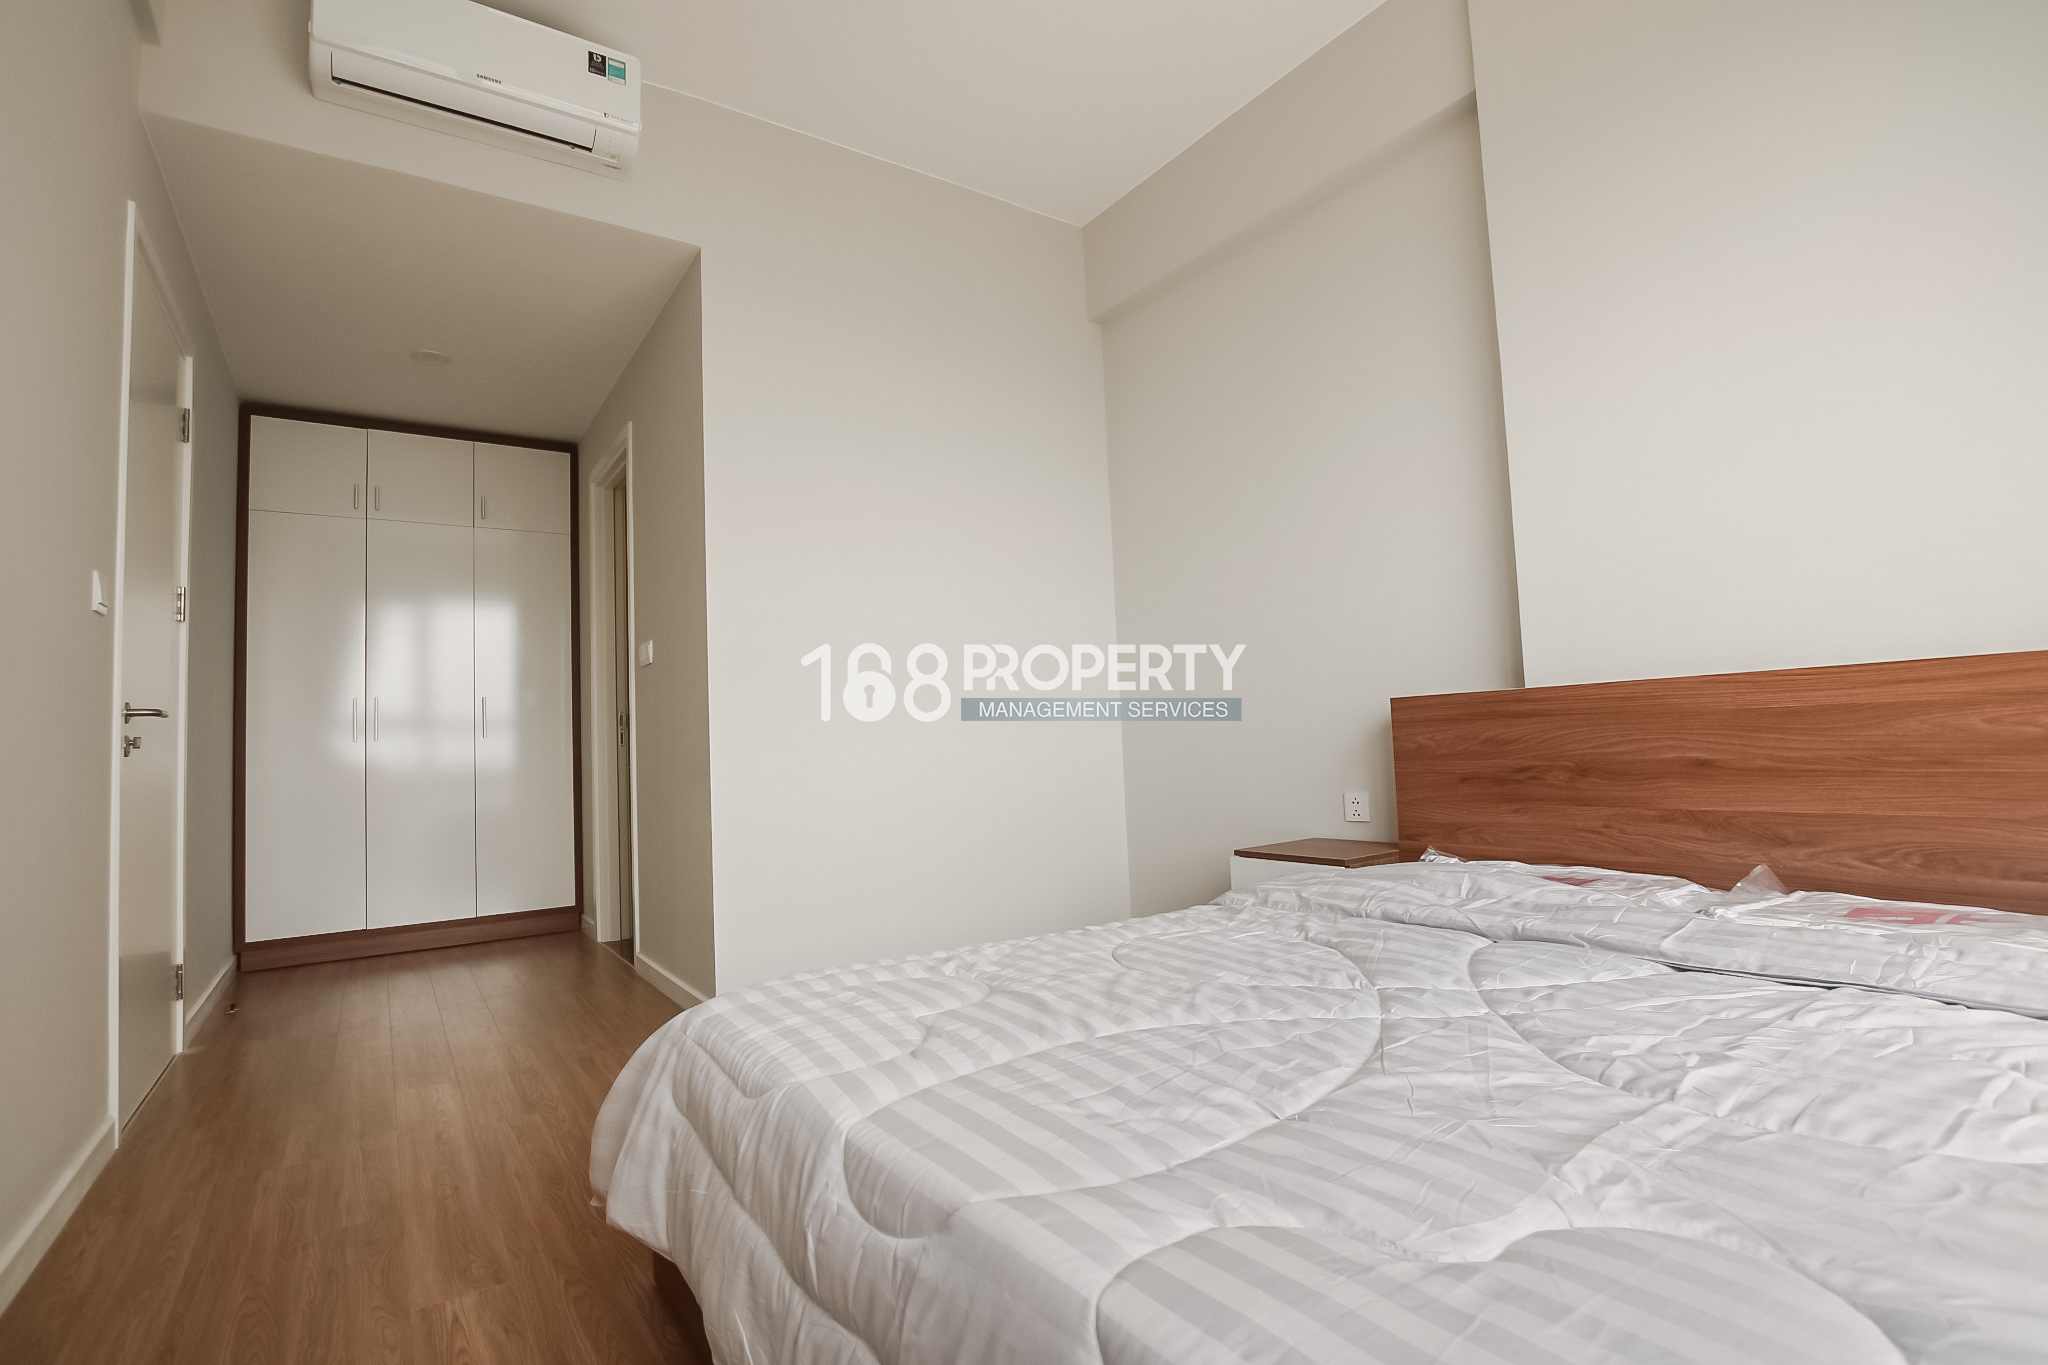 Masteri An Phu Apartment For Rent In Thao Dien 168Property